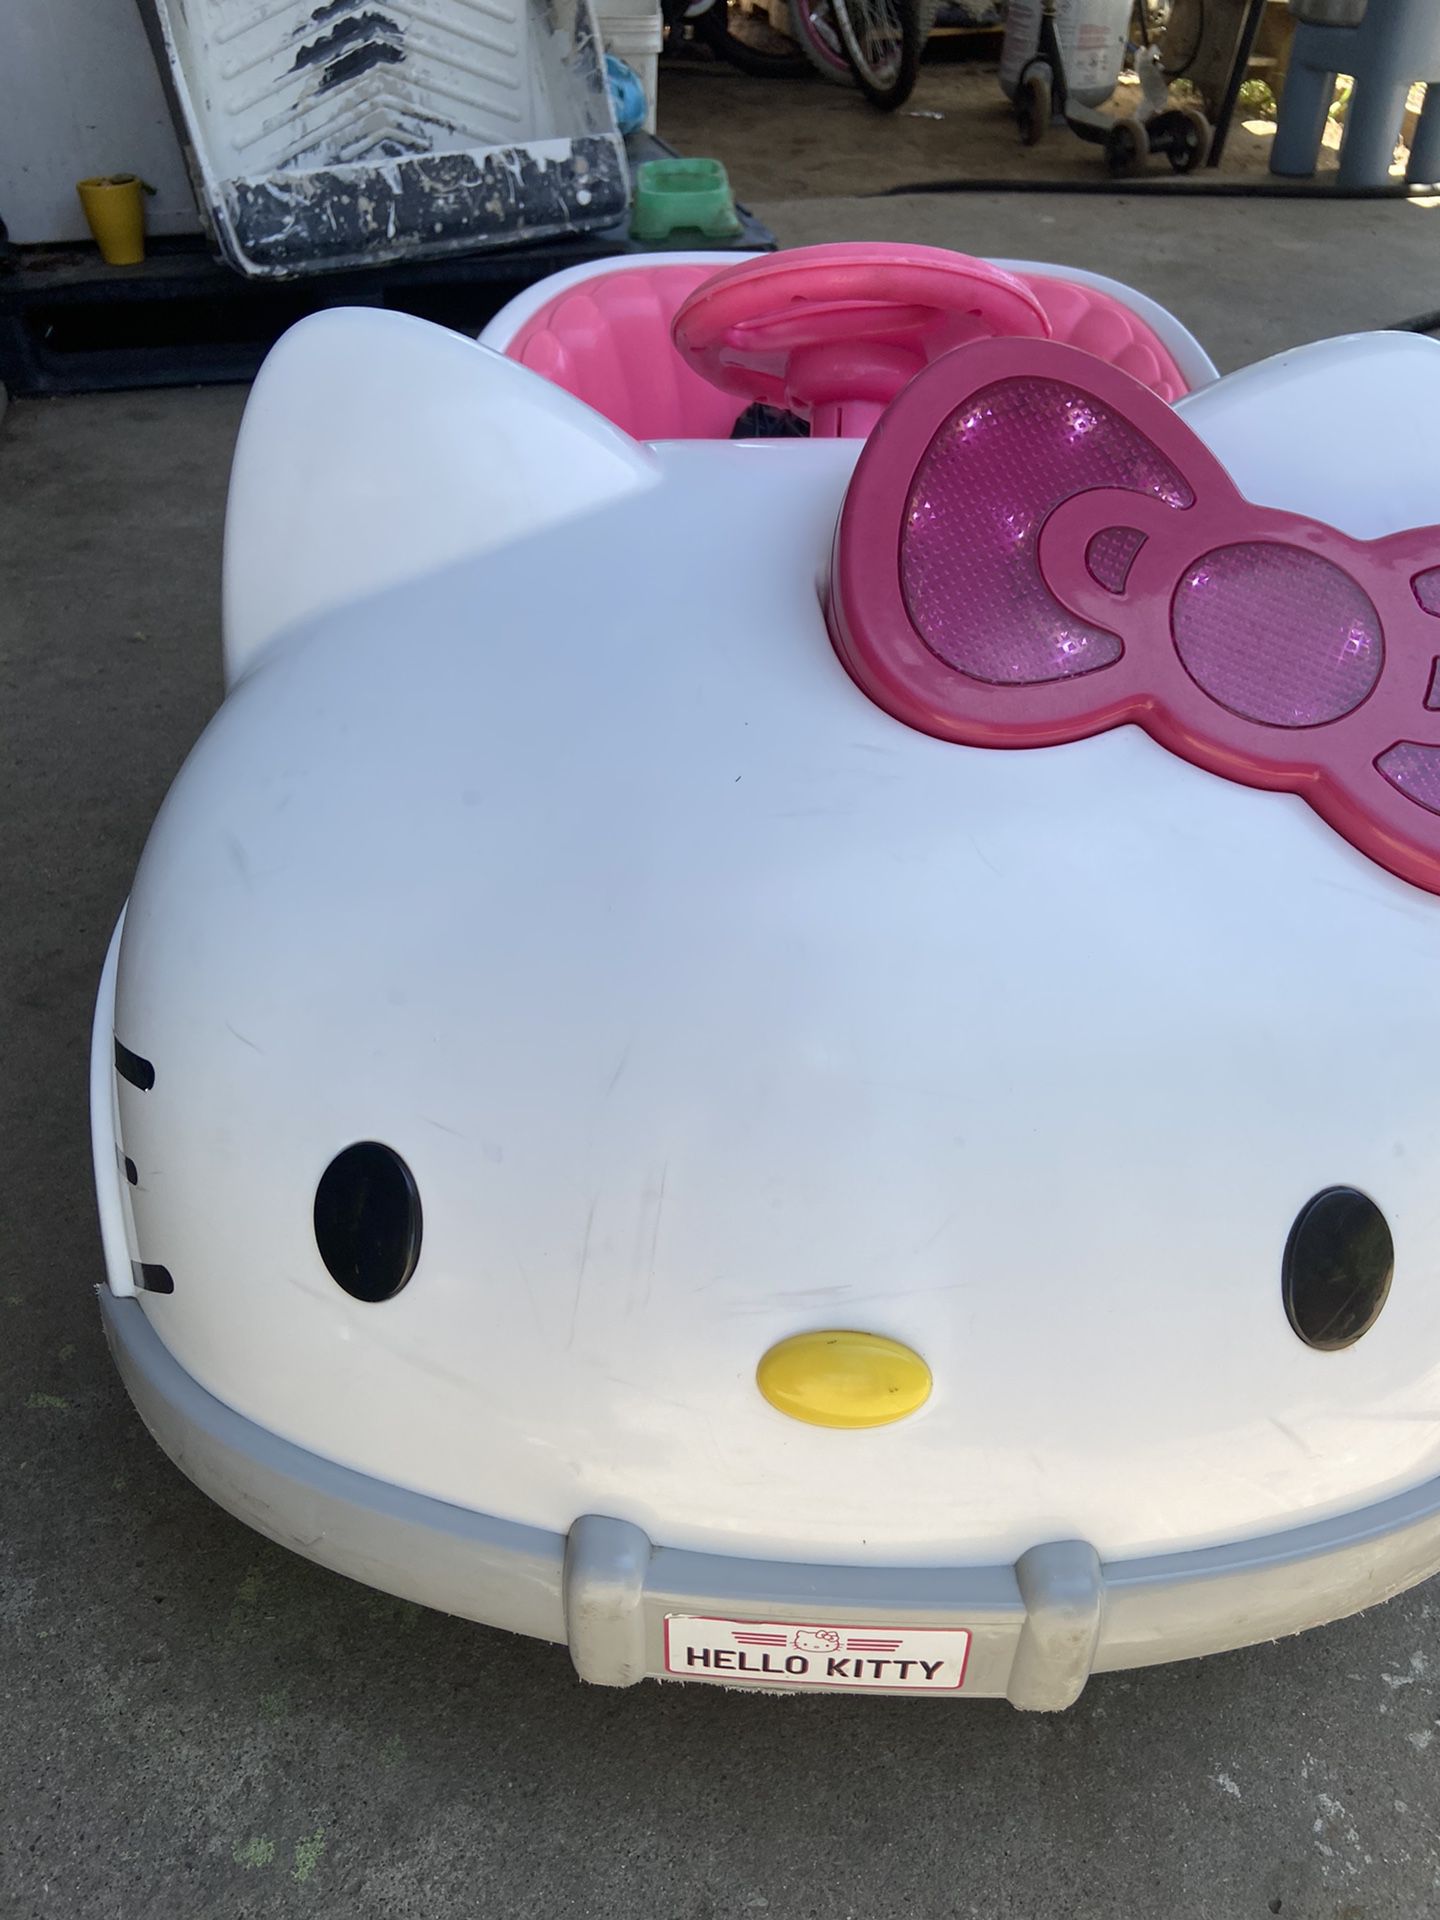 hello kitty car has to connect bluetooth